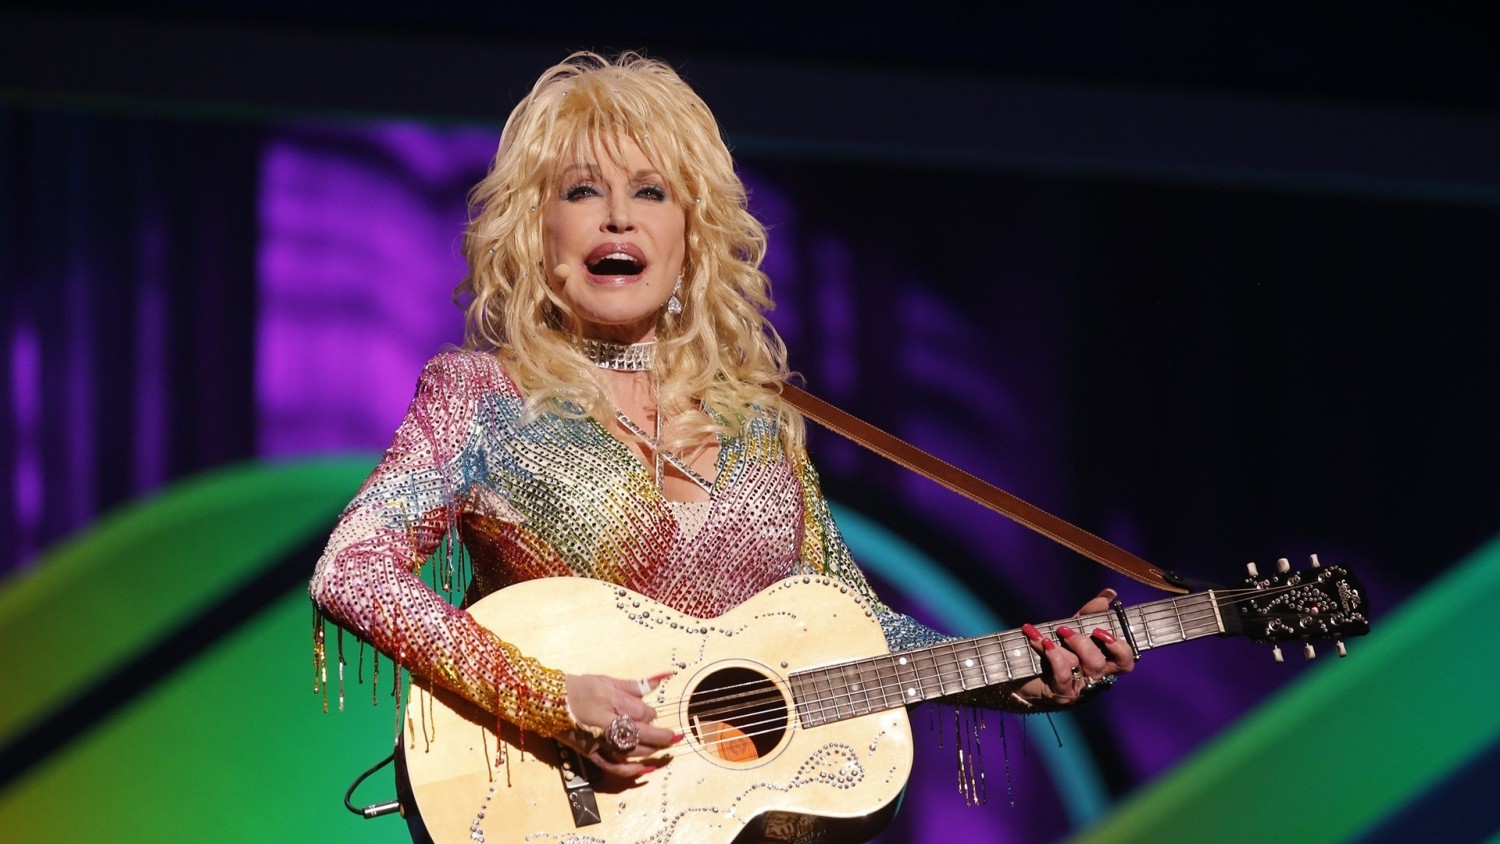 Dolly Parton reveals secret to 56-year marriage with husband Carl Thomas  Dean: 'It was meant to be